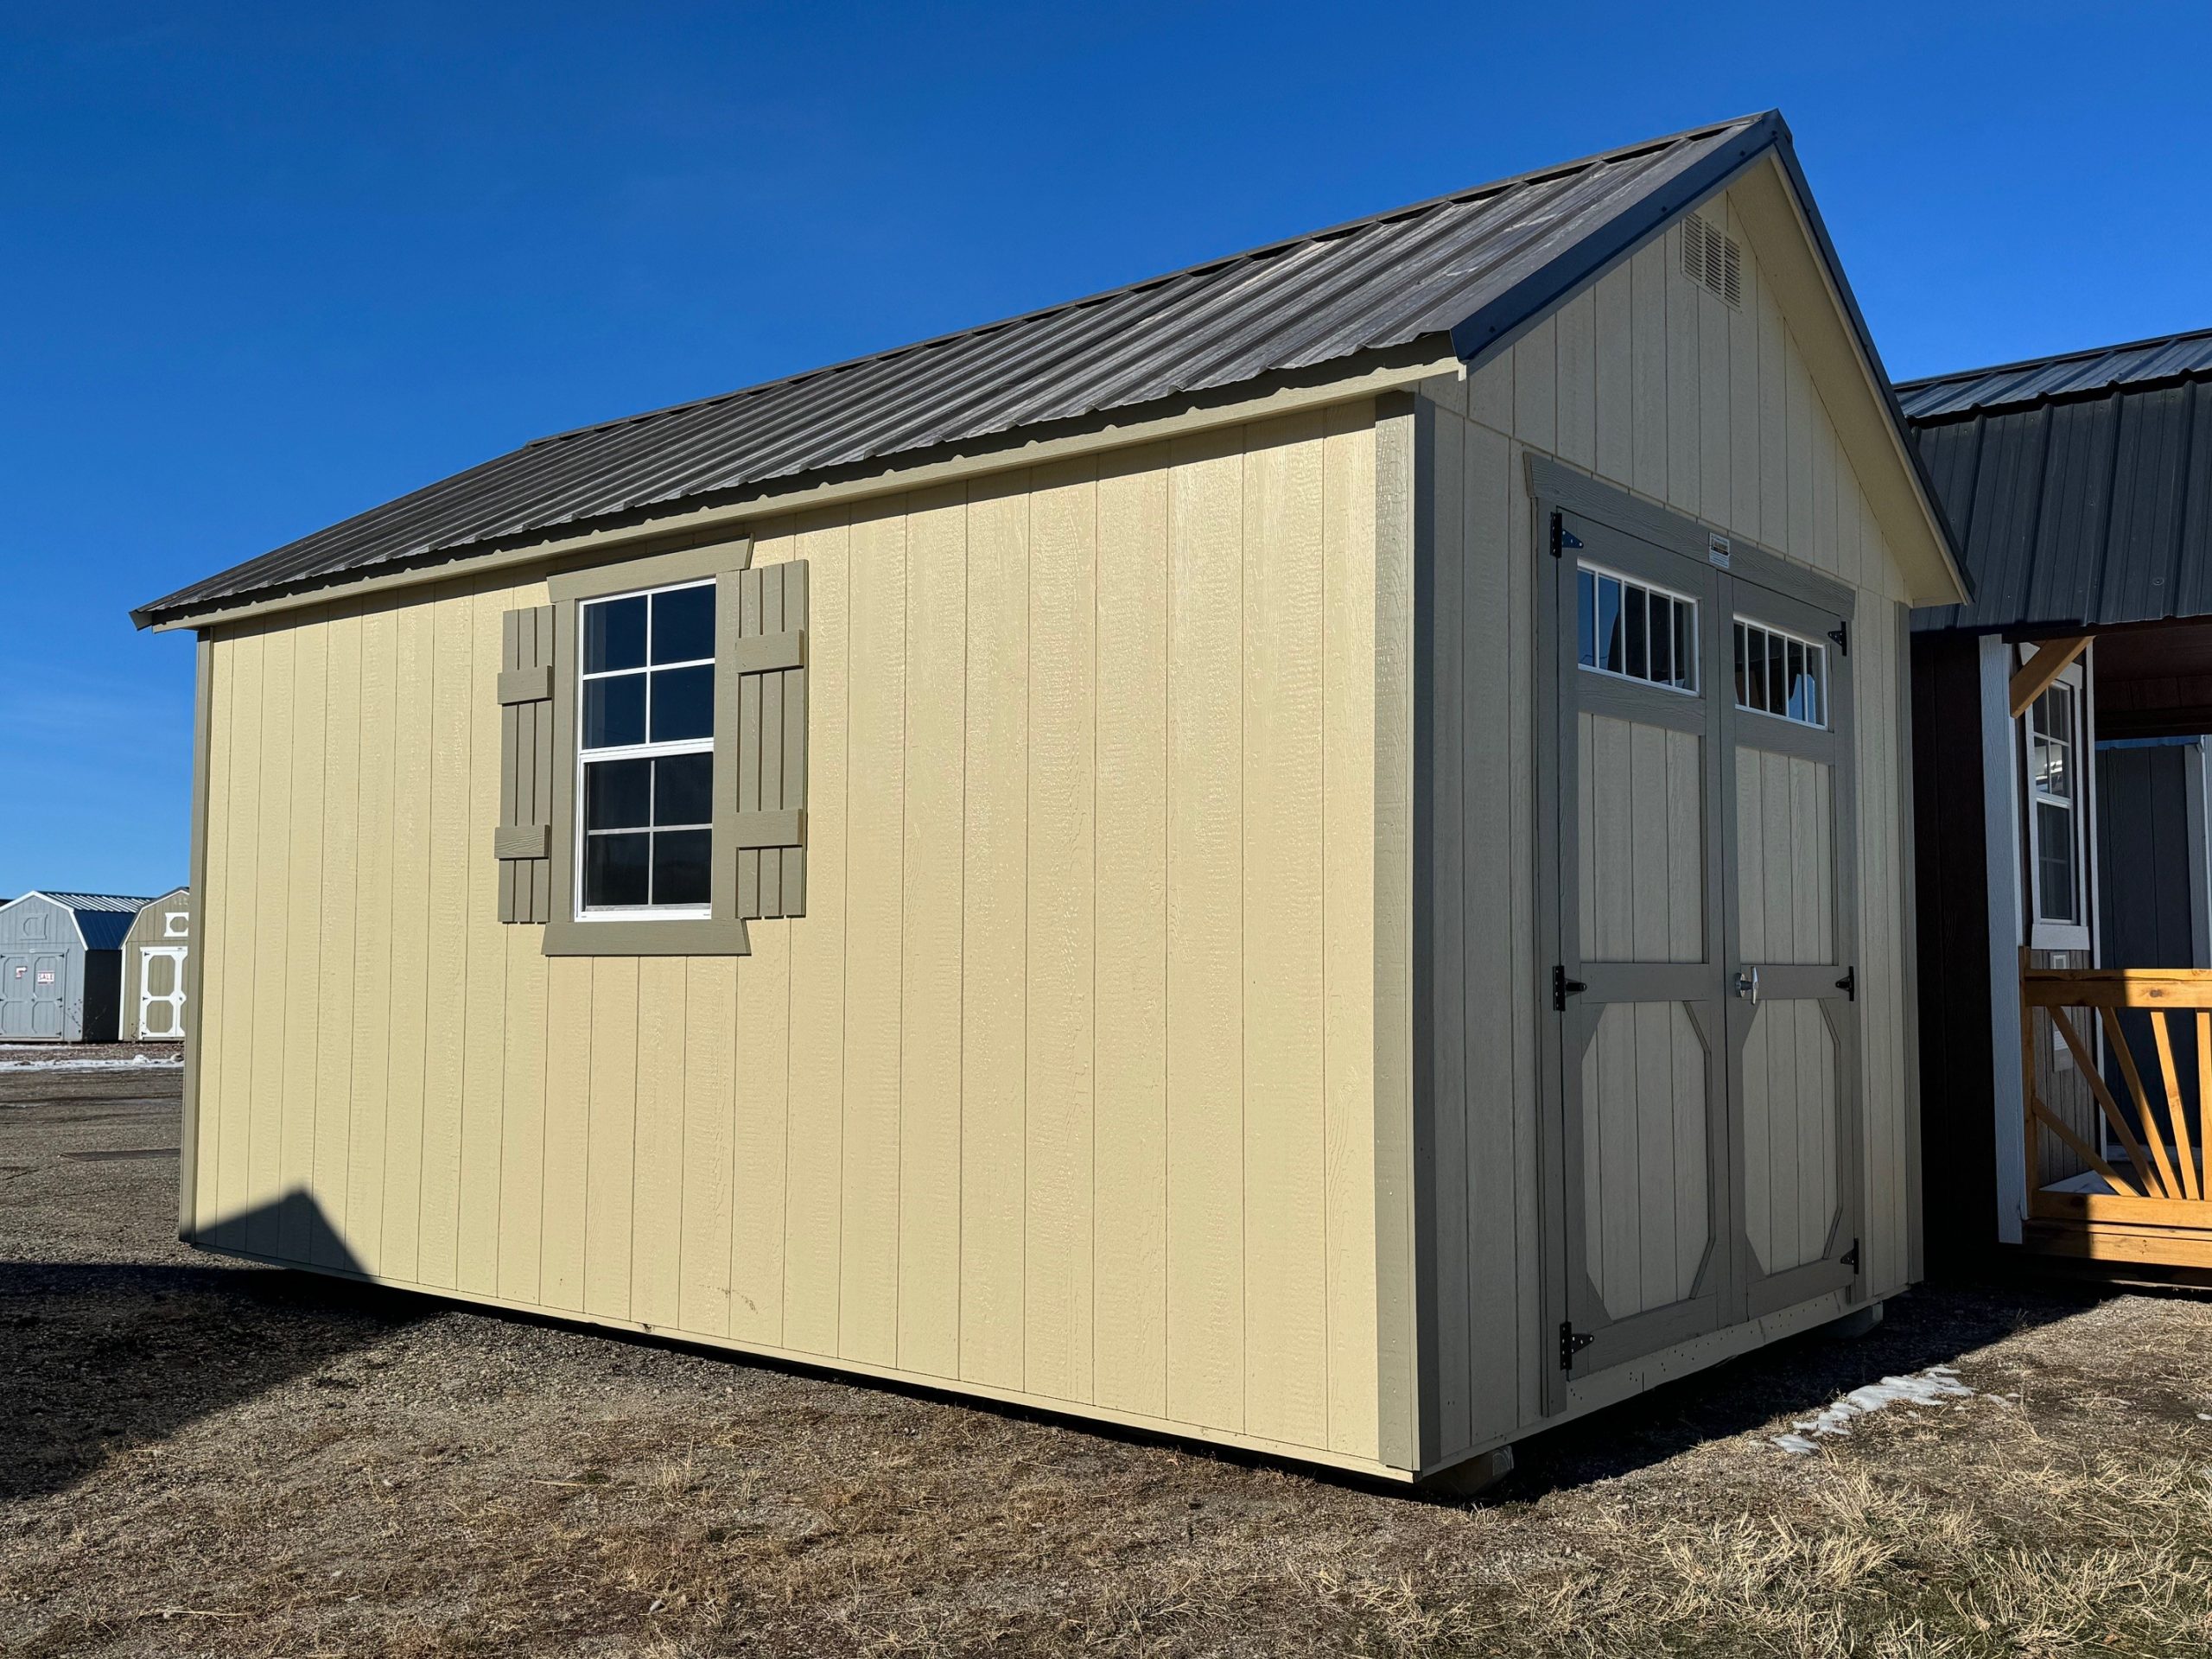 10×16 Utility Shed For Sale Beige Paint Rosemary Green Trim